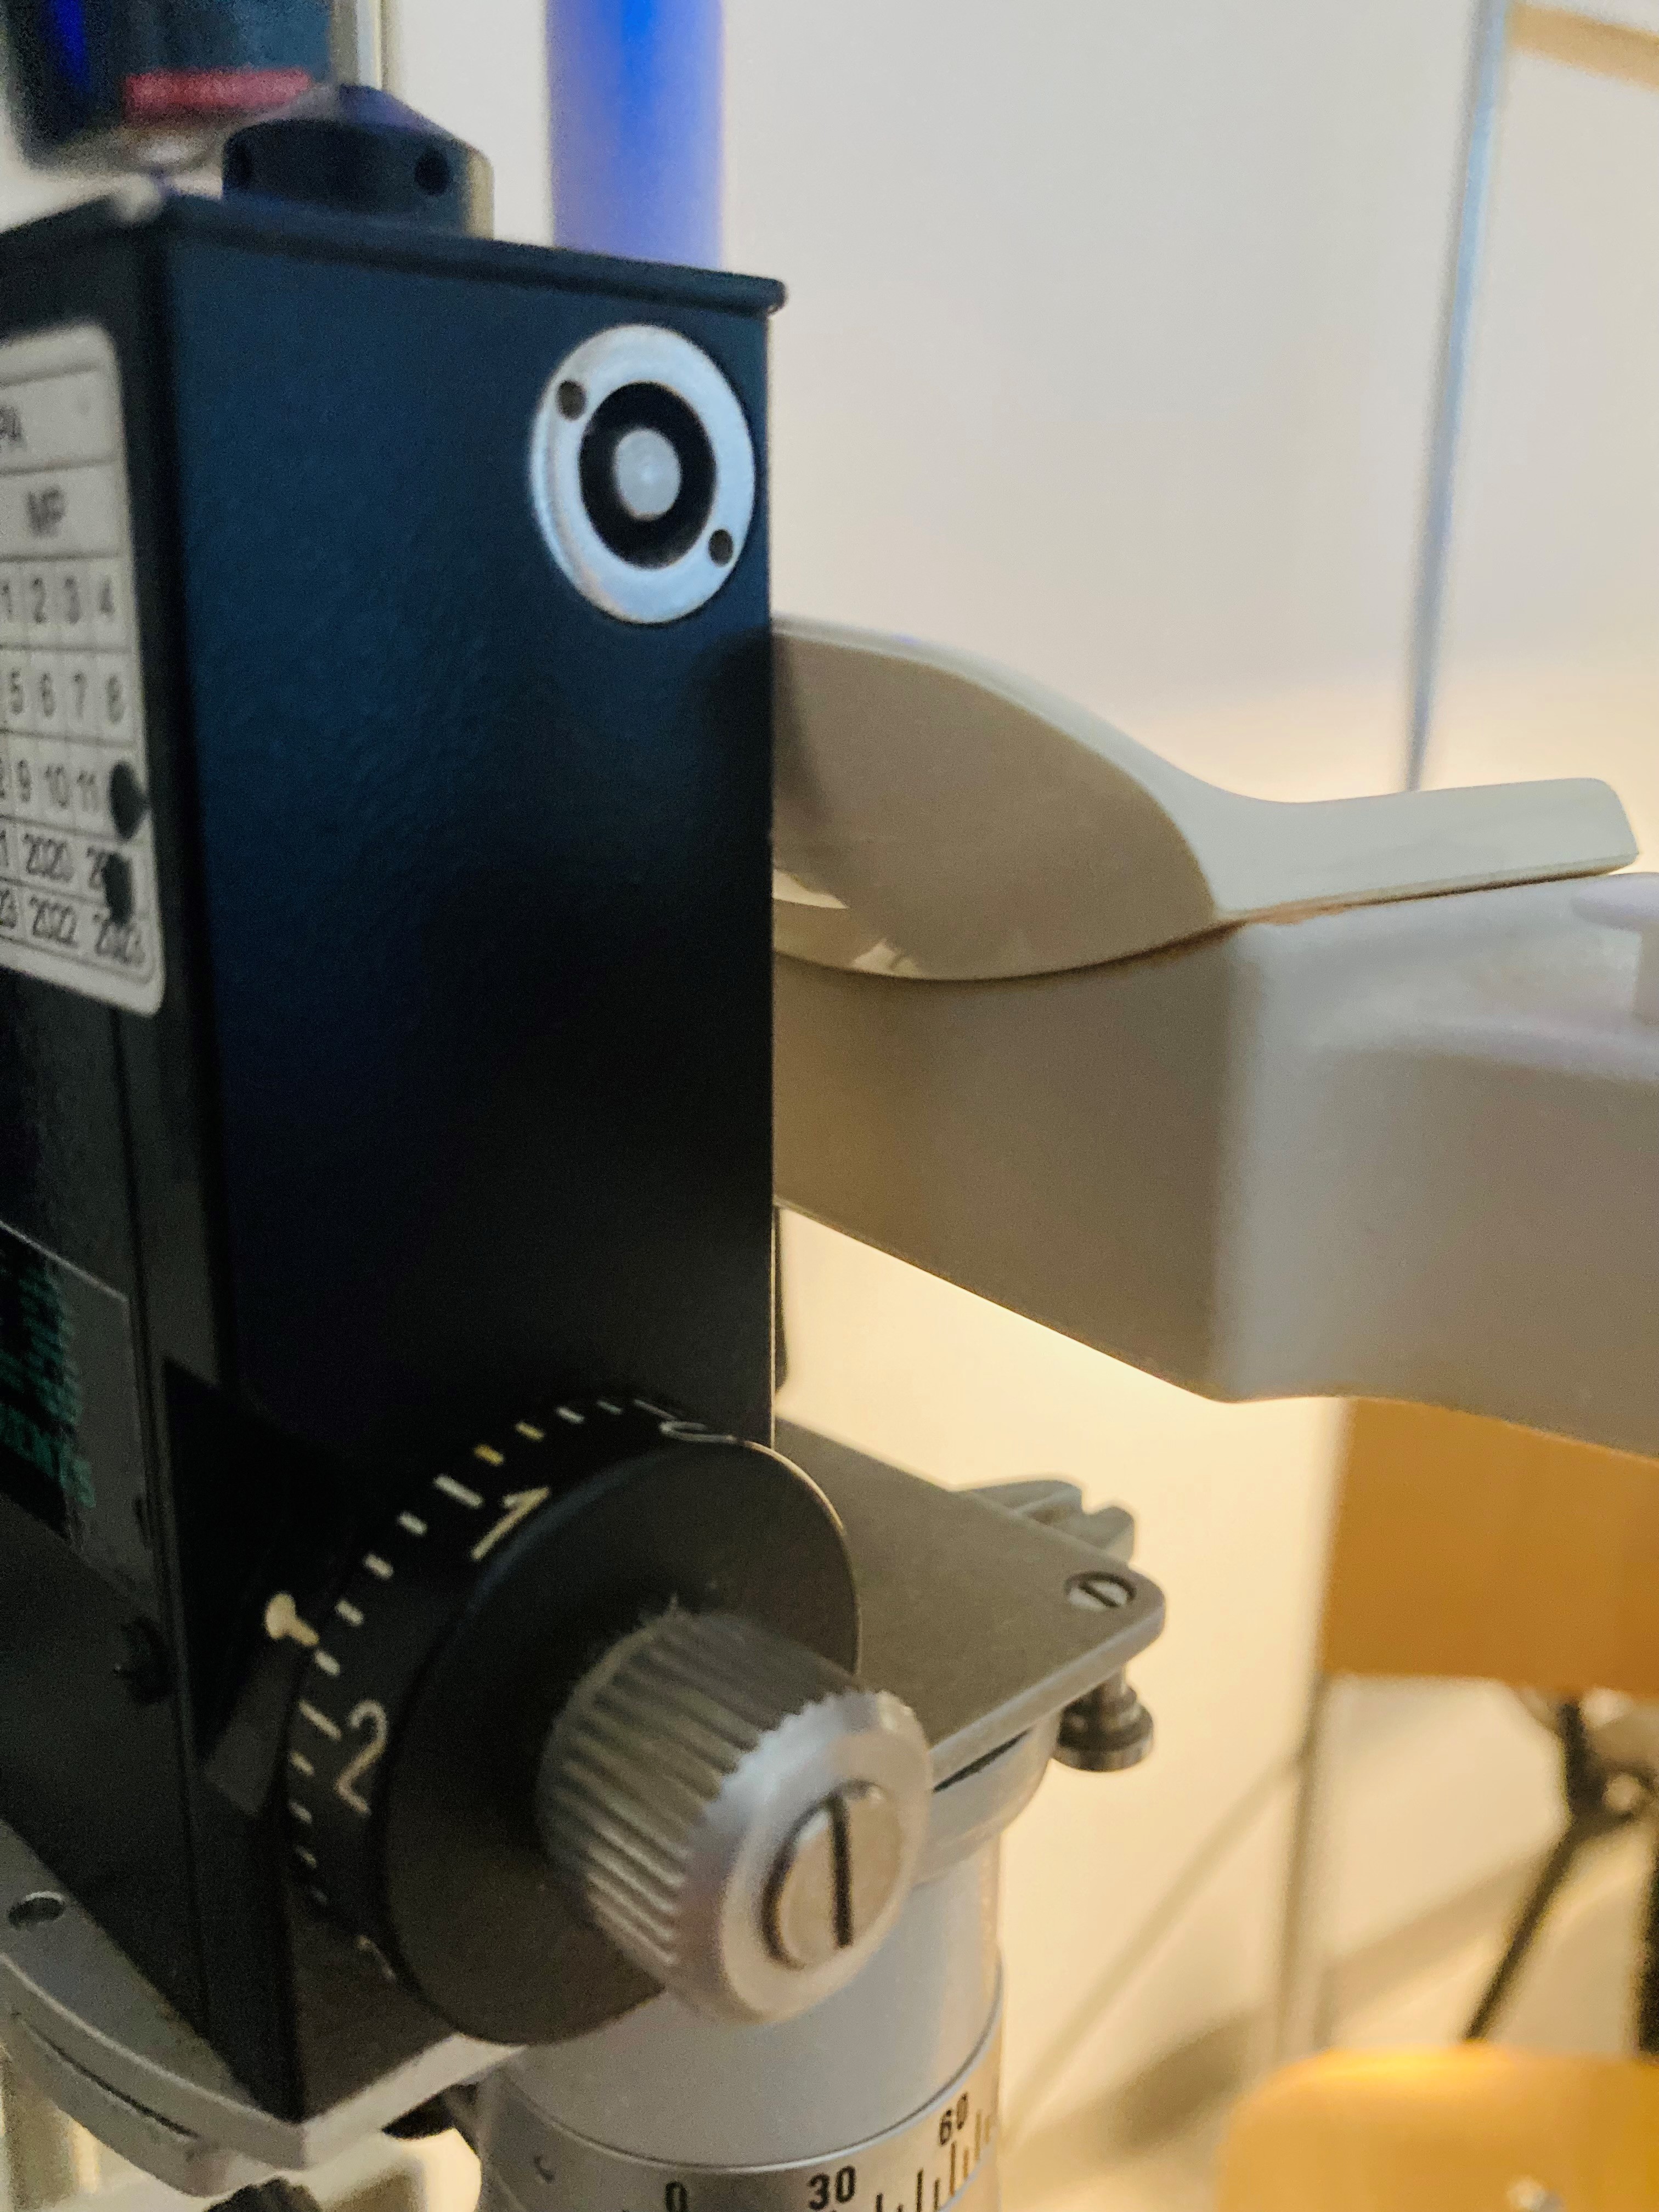 The Goldmann Applanation Tonometer (GAT) is equipped with a dial to measure intraocular pressure (IOP) in millimeters of mercury (mmHg)